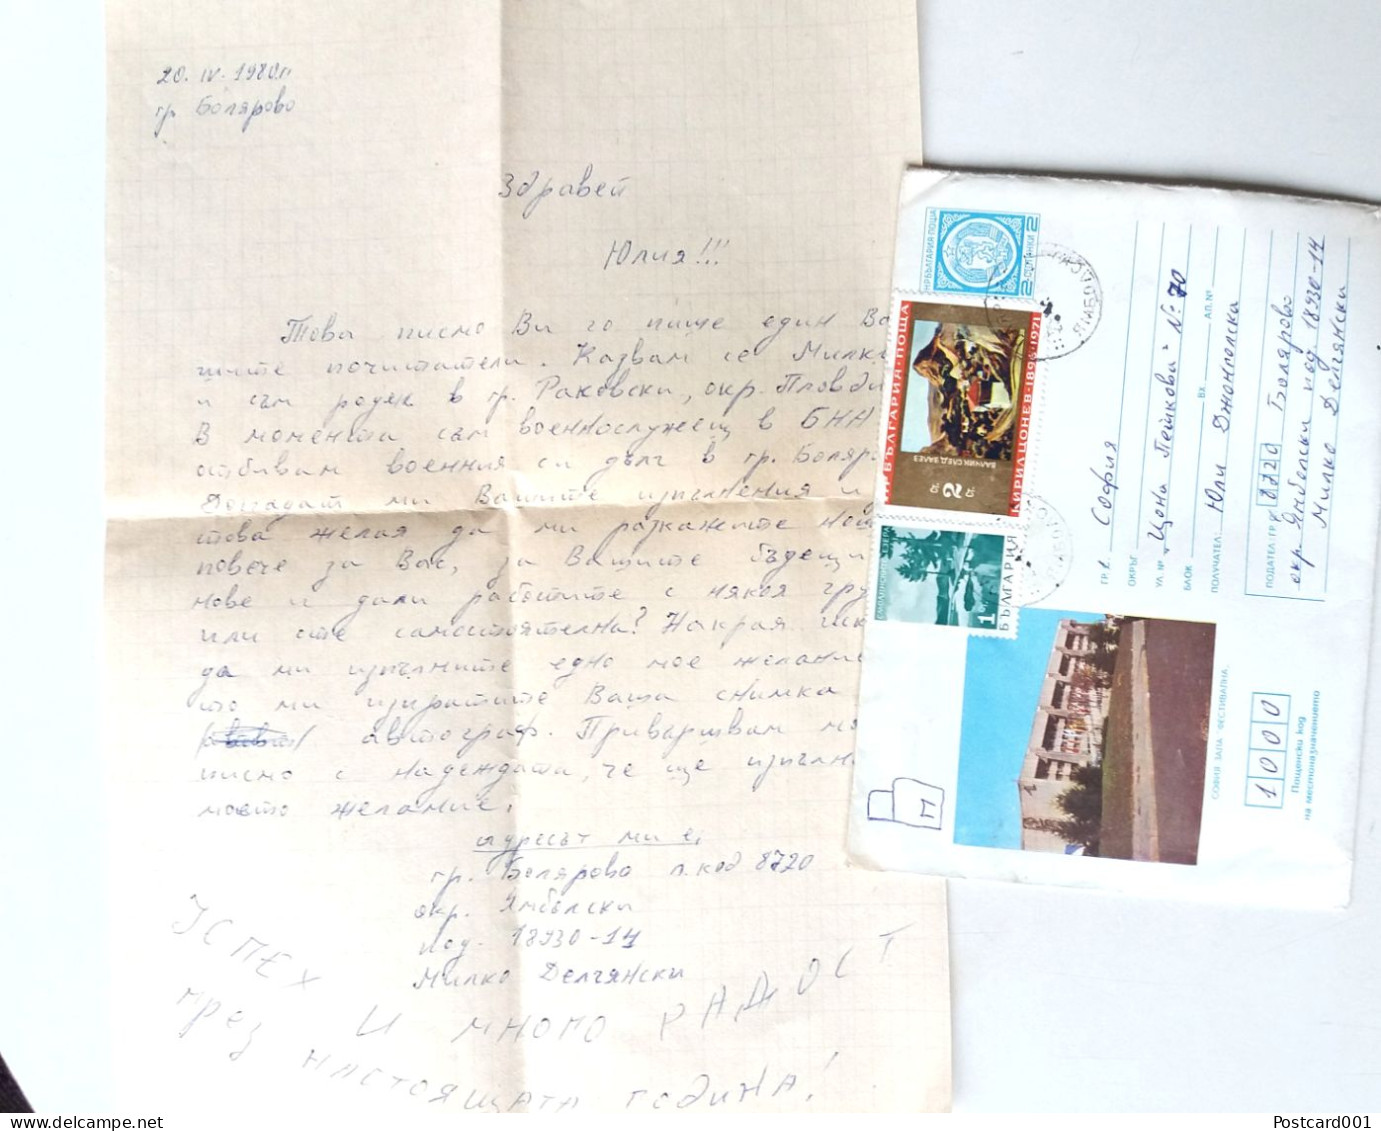 #85 Traveled Envelope Russian-Turkish War And Letter Cirillic Manuscript Bulgaria 1980 - Stamps Local Mail - Covers & Documents